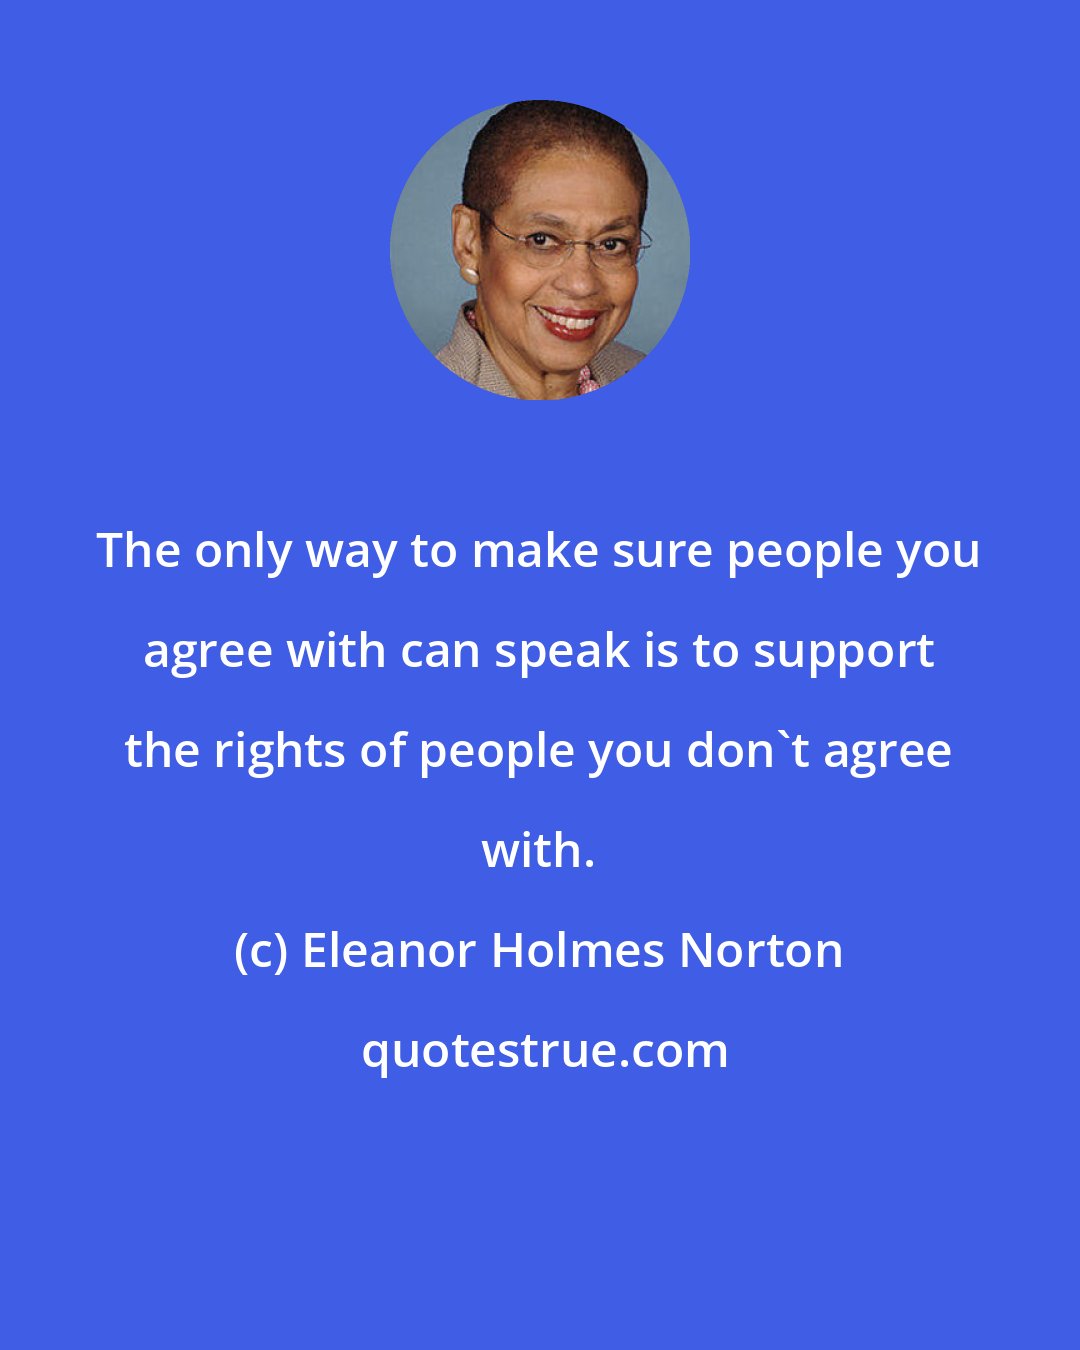 Eleanor Holmes Norton: The only way to make sure people you agree with can speak is to support the rights of people you don't agree with.